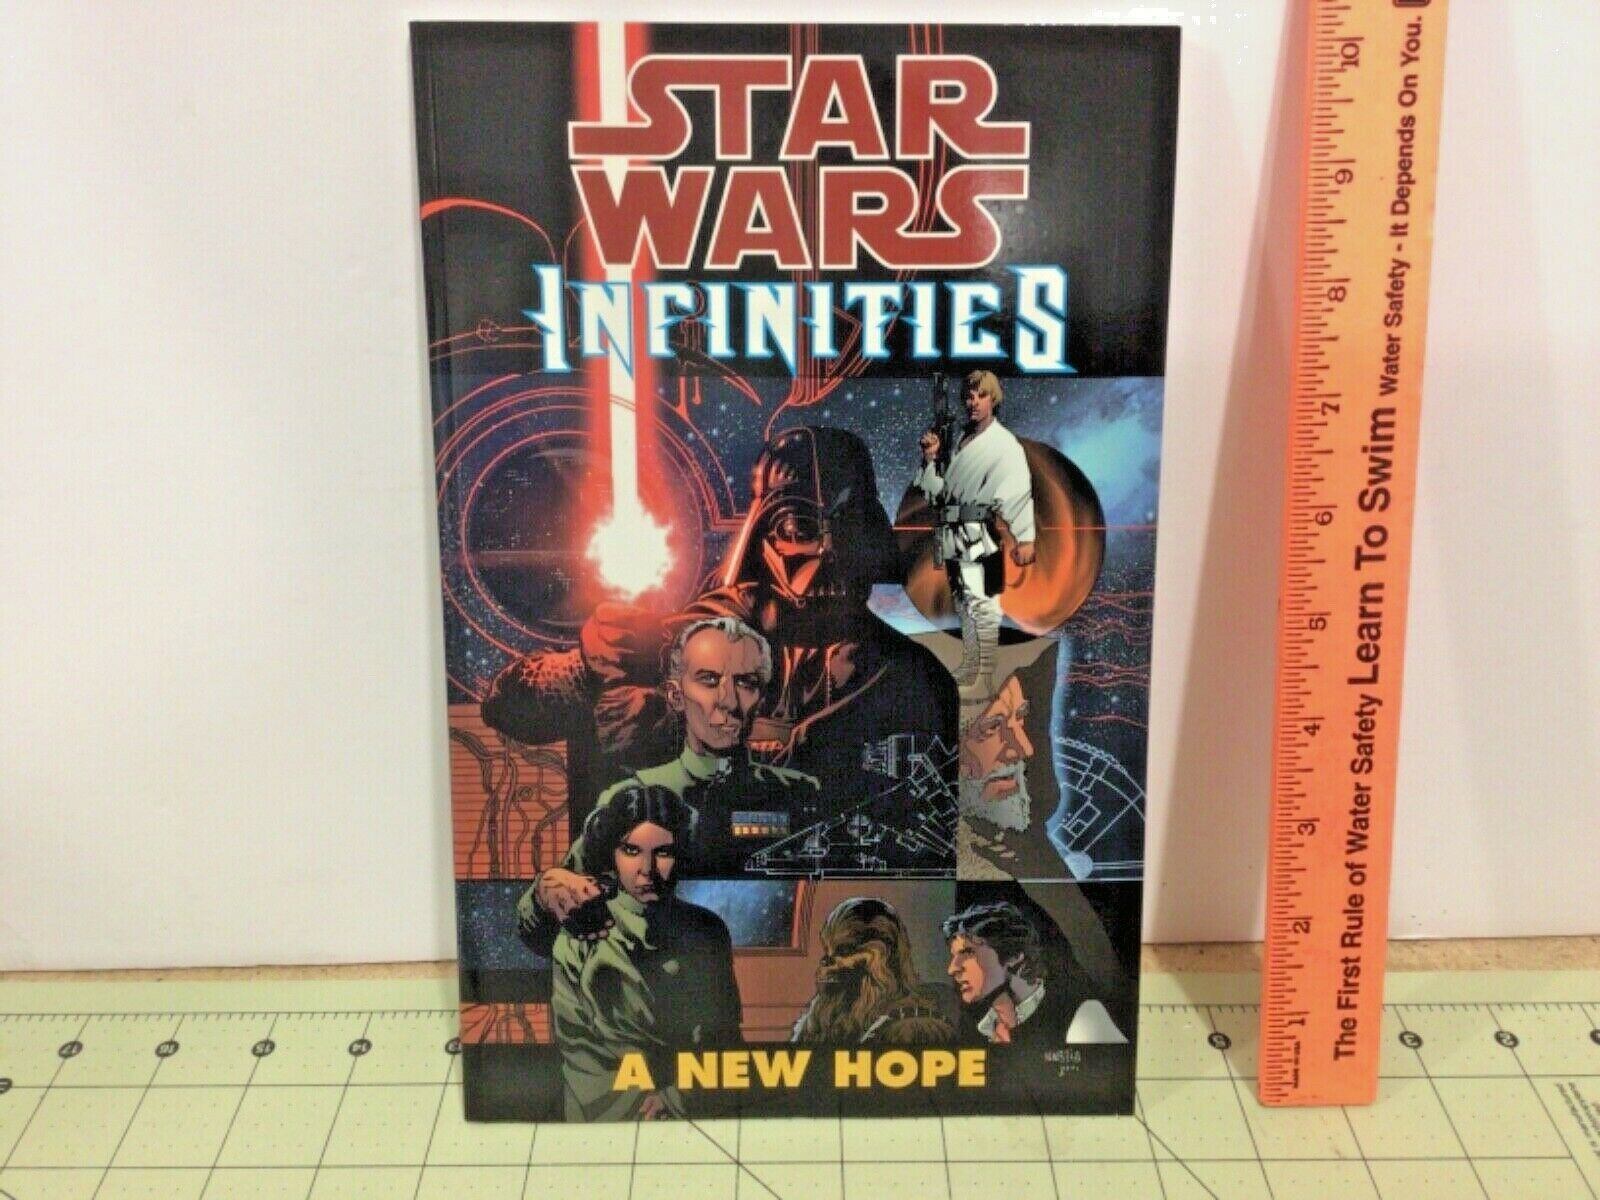 Star Wars Infinities “a New Hope” Soft Cover Graphic Novel, Free Shipping